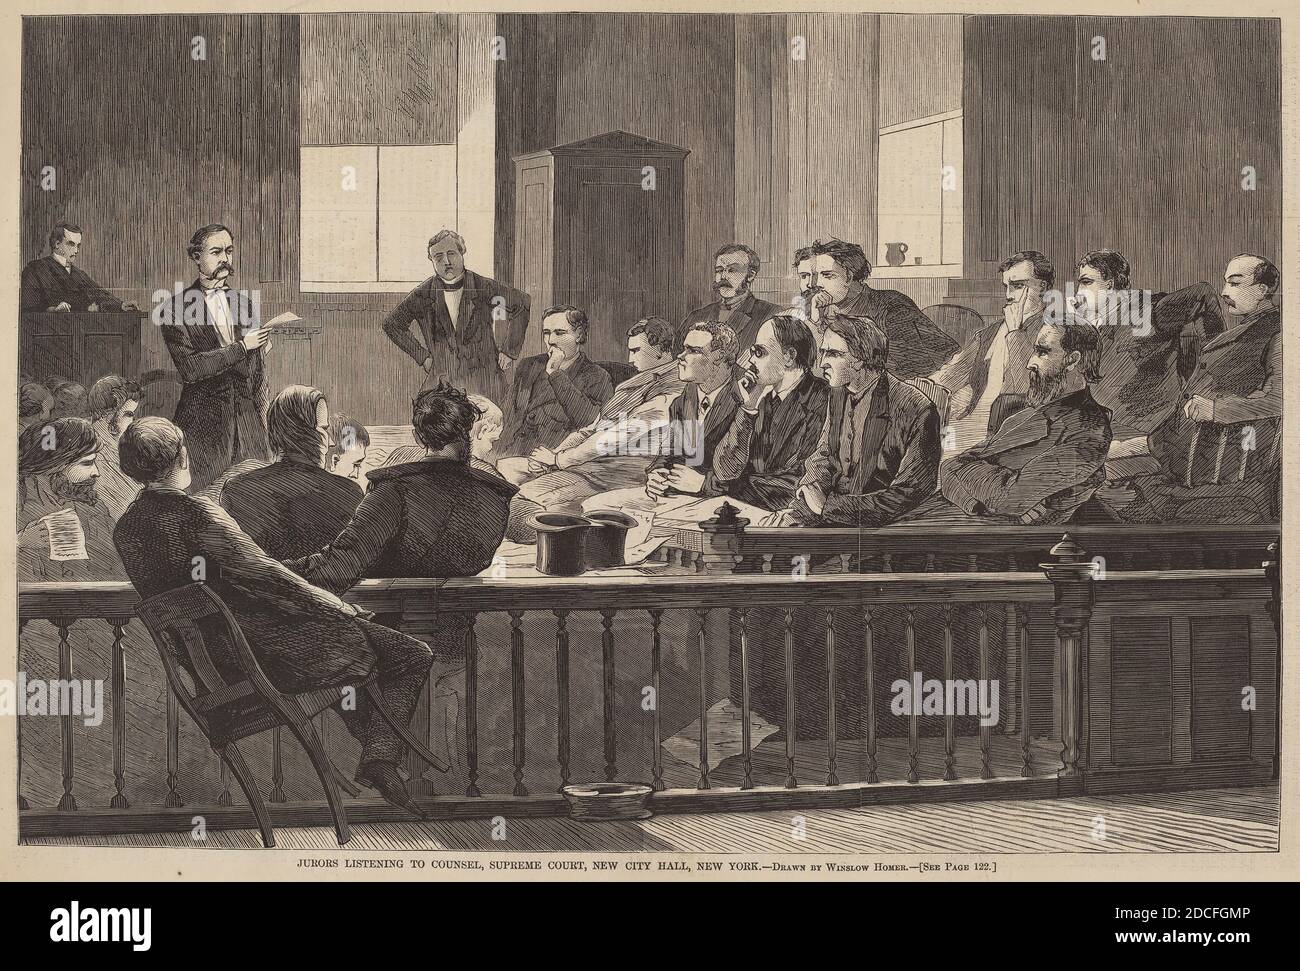 American 19th Century, (artist), Winslow Homer, (artist after), American, 1836 - 1910, Jurors Listening to Counsel, Supreme Court, New City Hall, New York, From 'Harper's Weekly', February 20, 1869, p.120, (series), published 1869, wood engraving Stock Photo